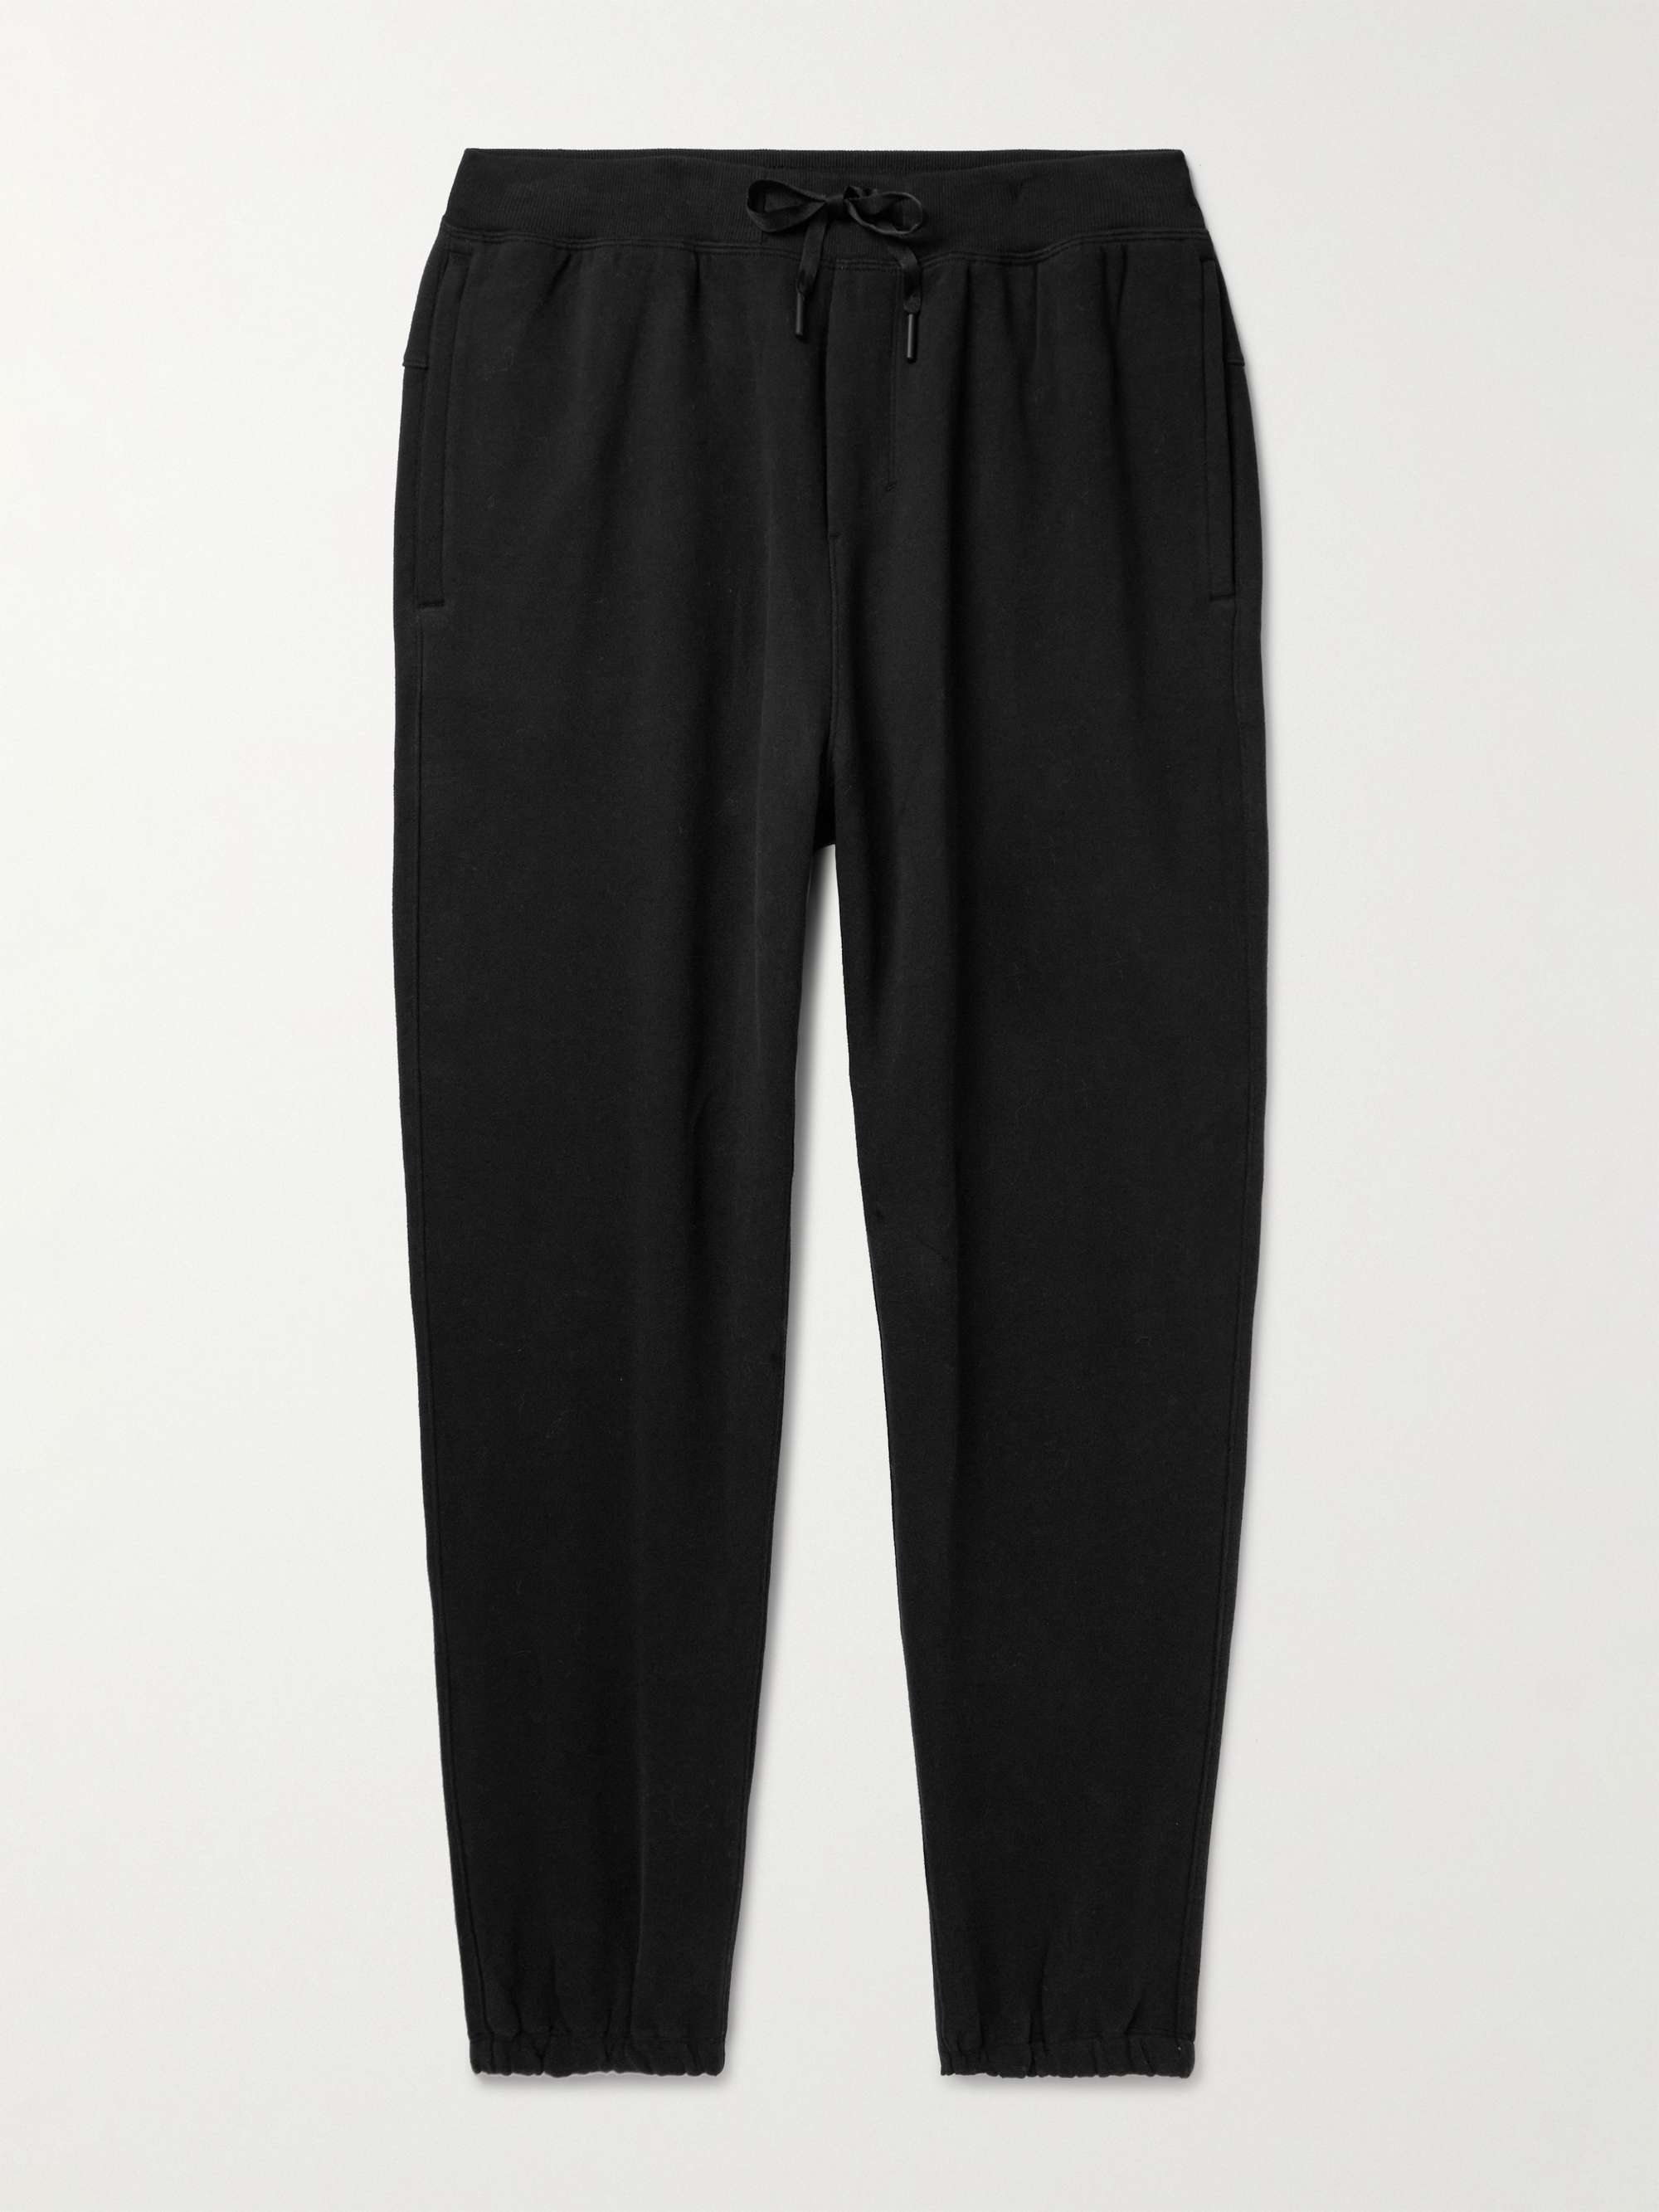 Steady State Tapered Cotton-Blend Jersey Sweatpants